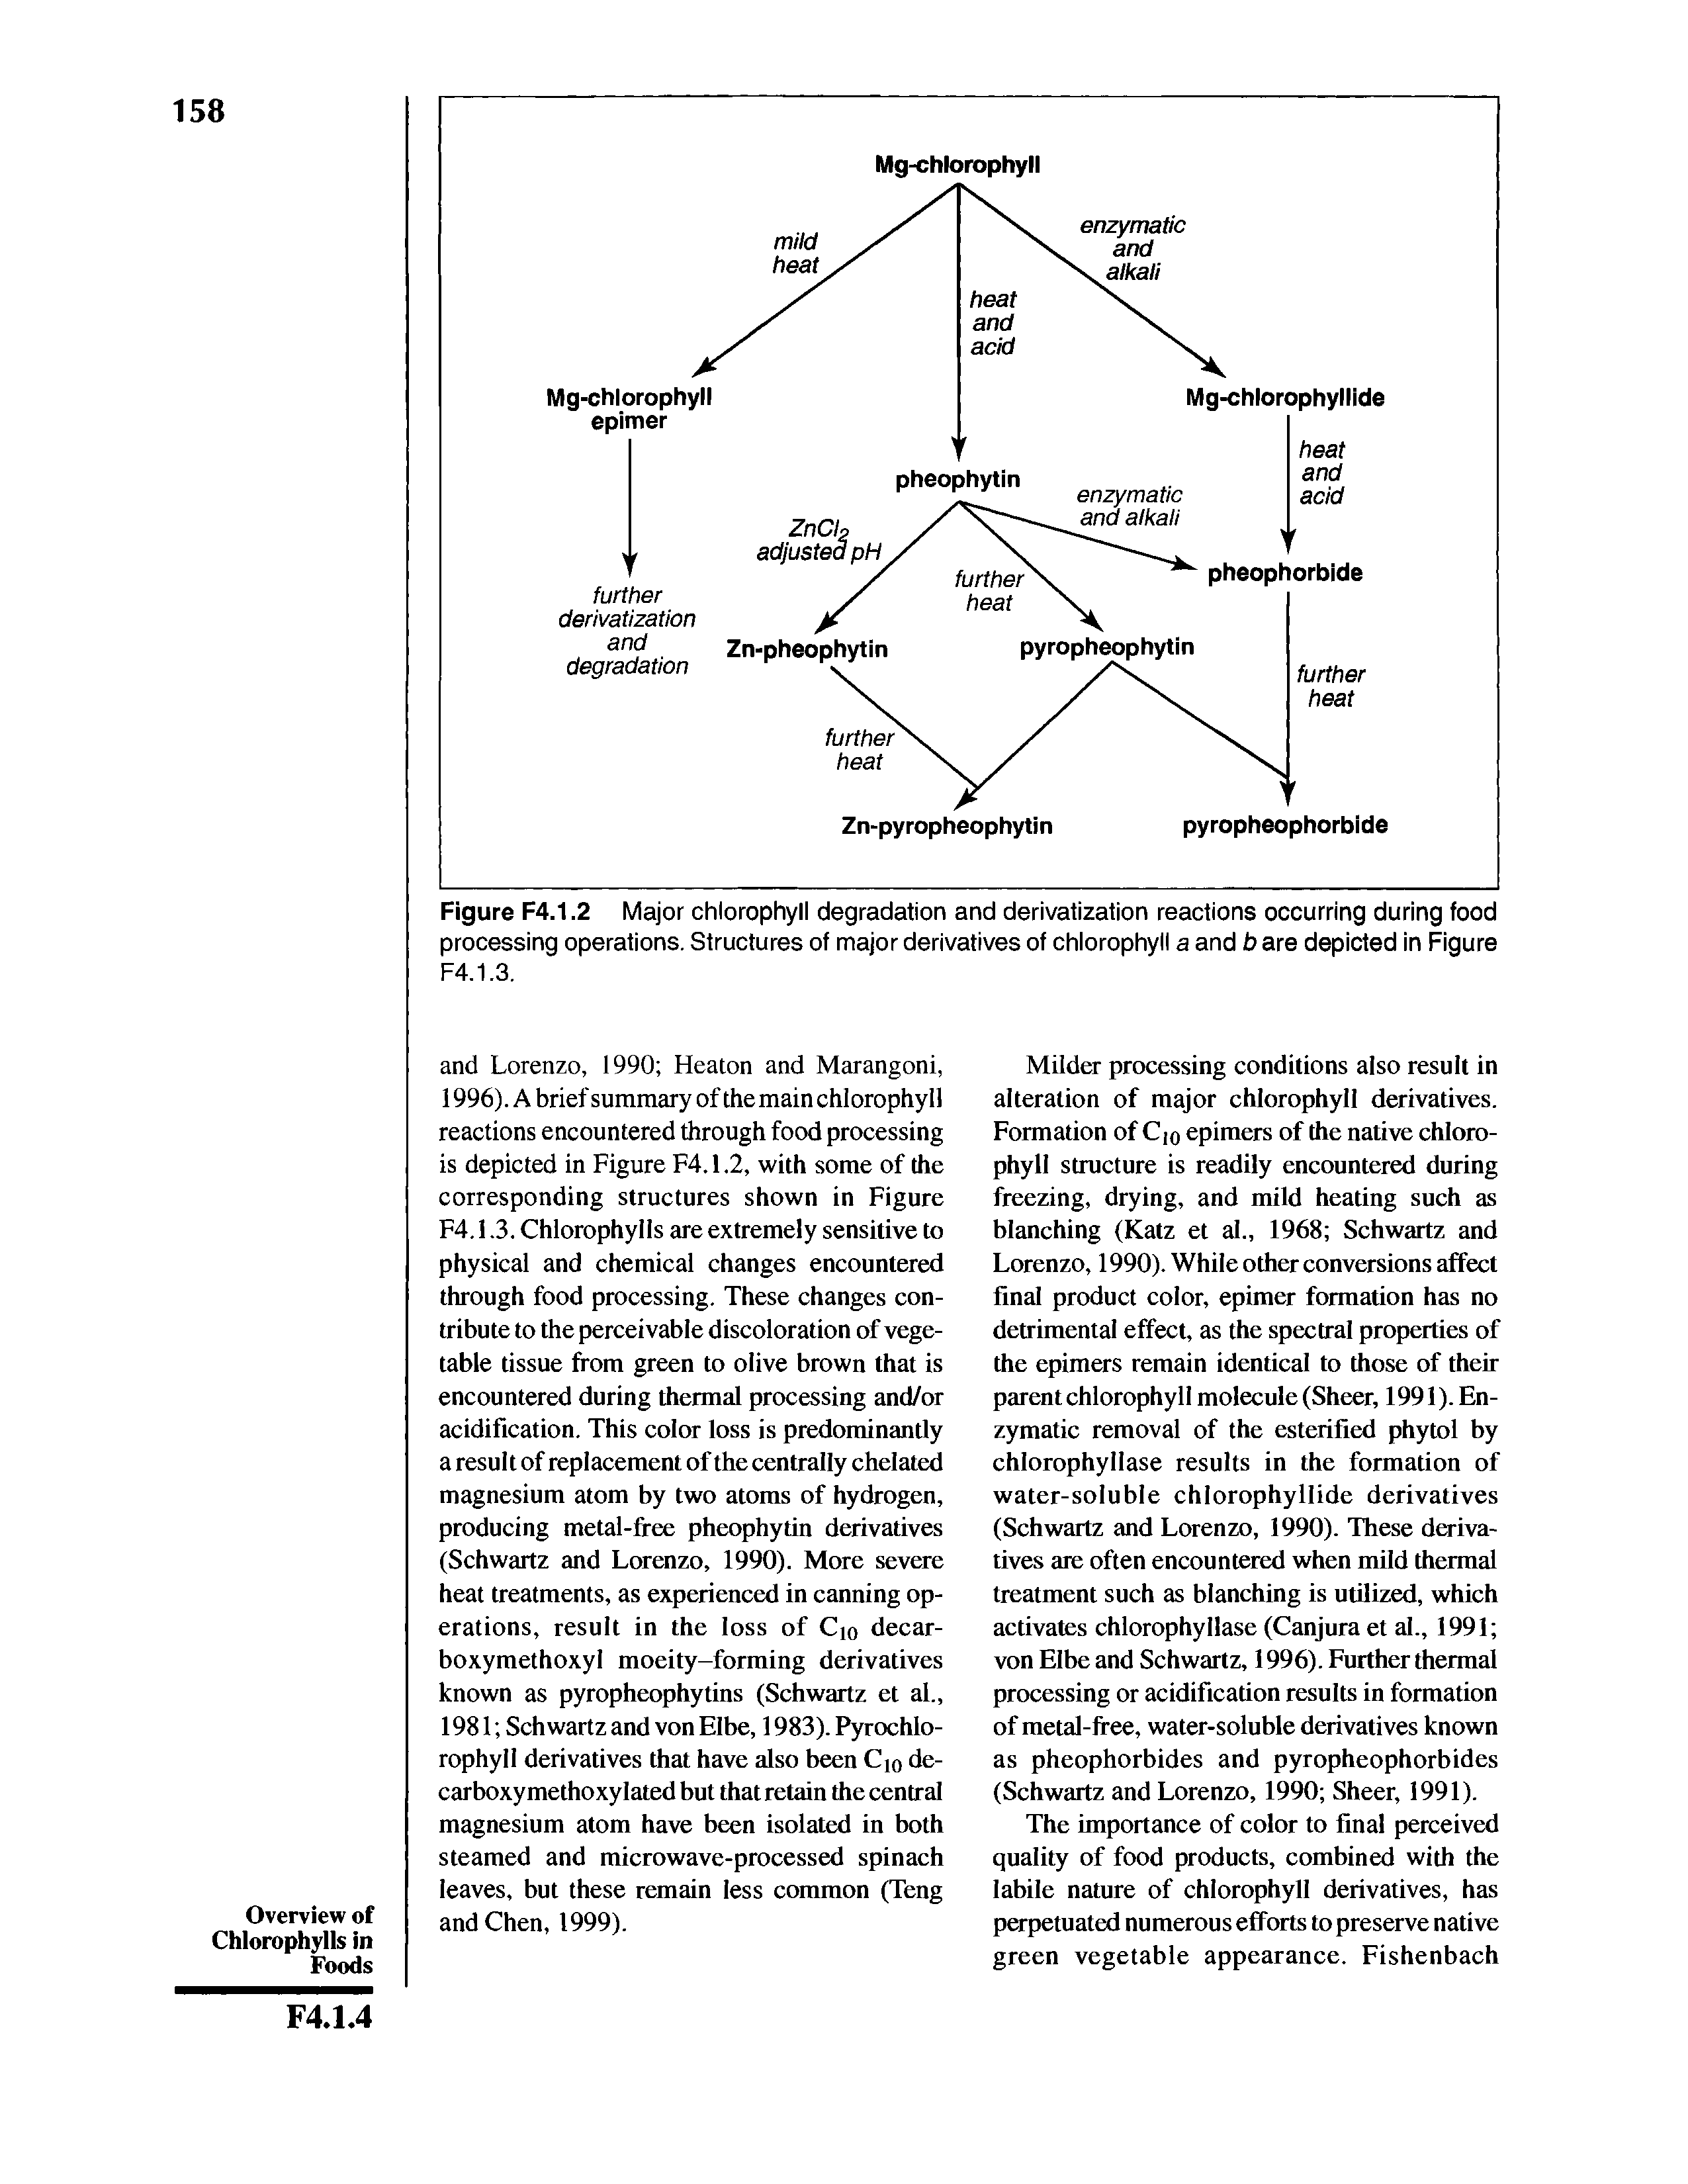 Figure F4.1.2 Major chlorophyll degradation and derivatization reactions occurring during food processing operations. Structures of major derivatives of chlorophyll a and b are depicted in Figure F4.1.3.